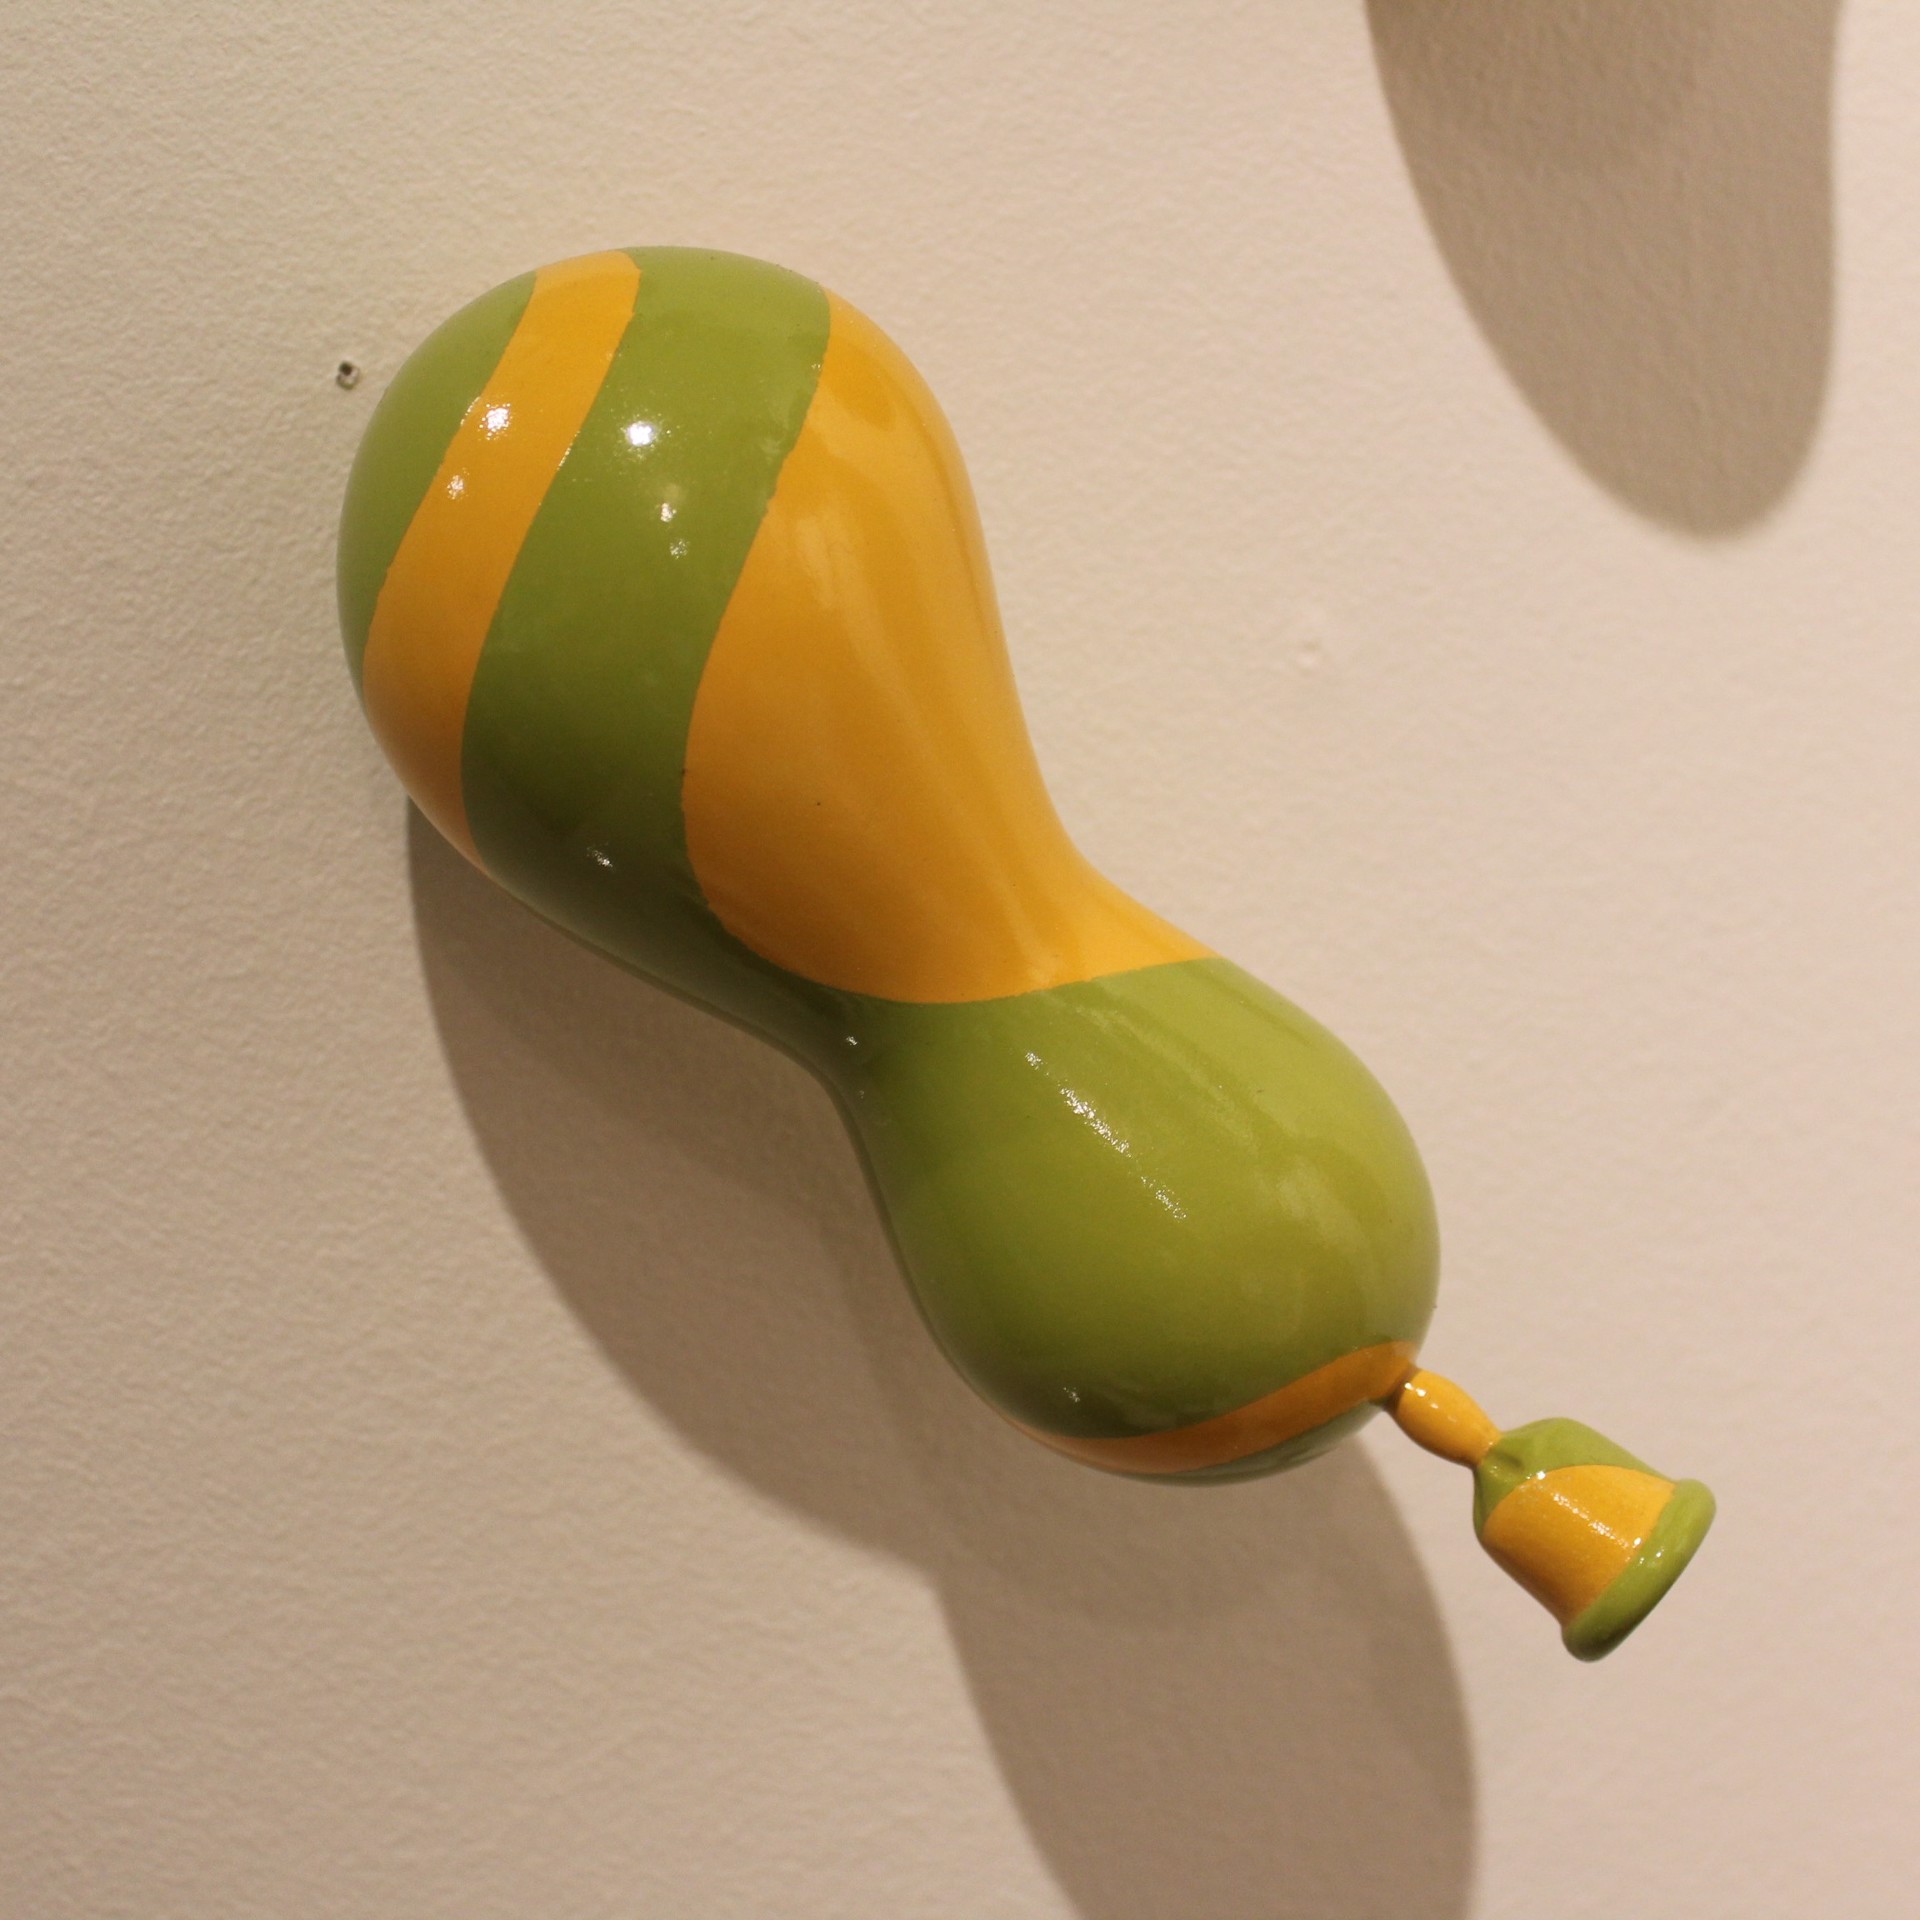 Small Balloon (green and yellow swirl) by Sean O'Meallie